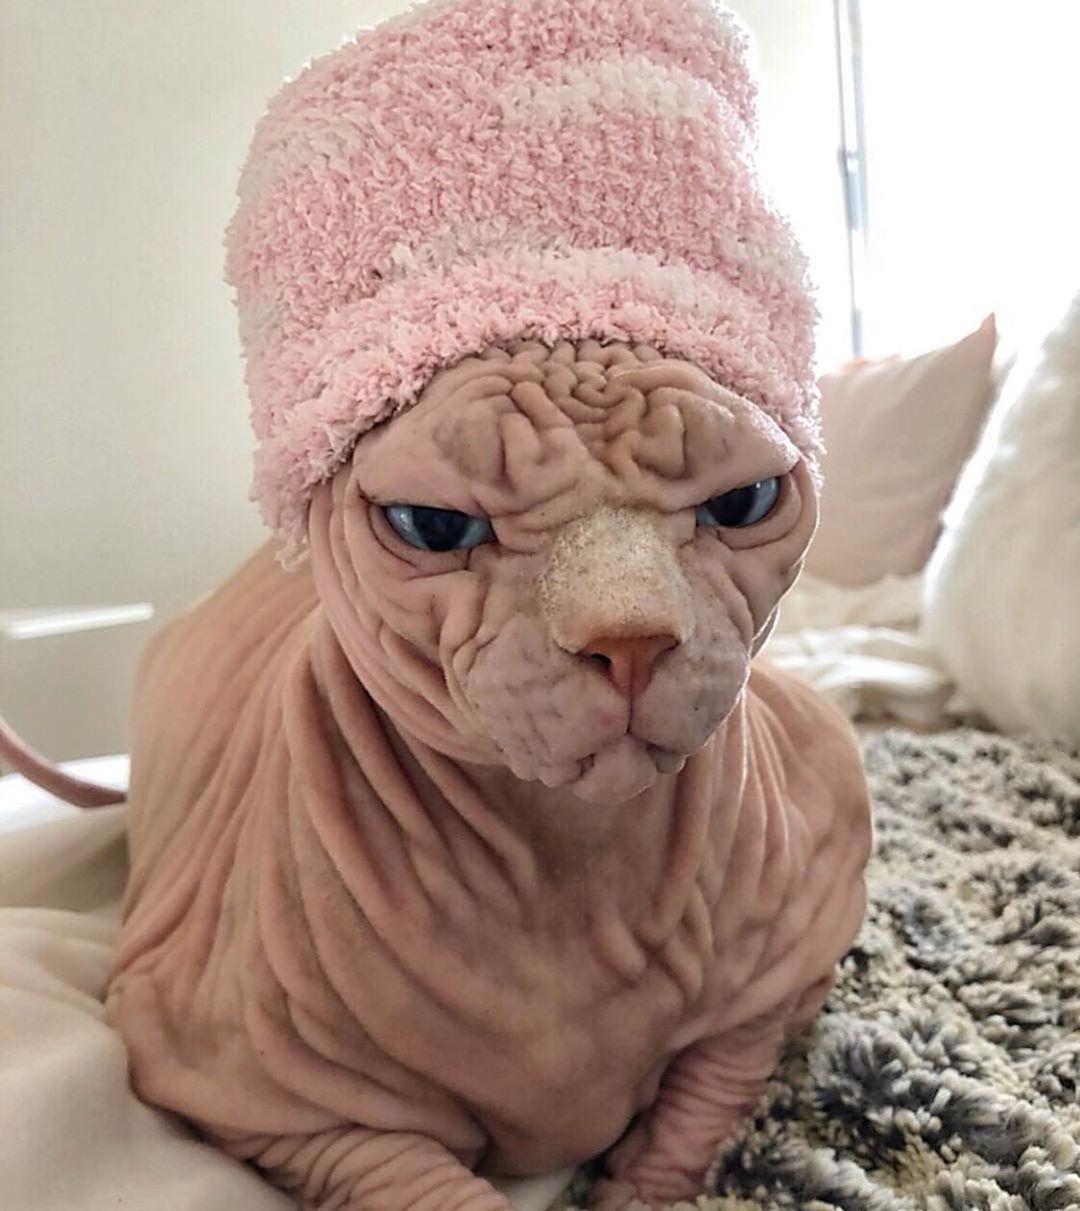 Sphynx Cat lying on the bed wear a beanie